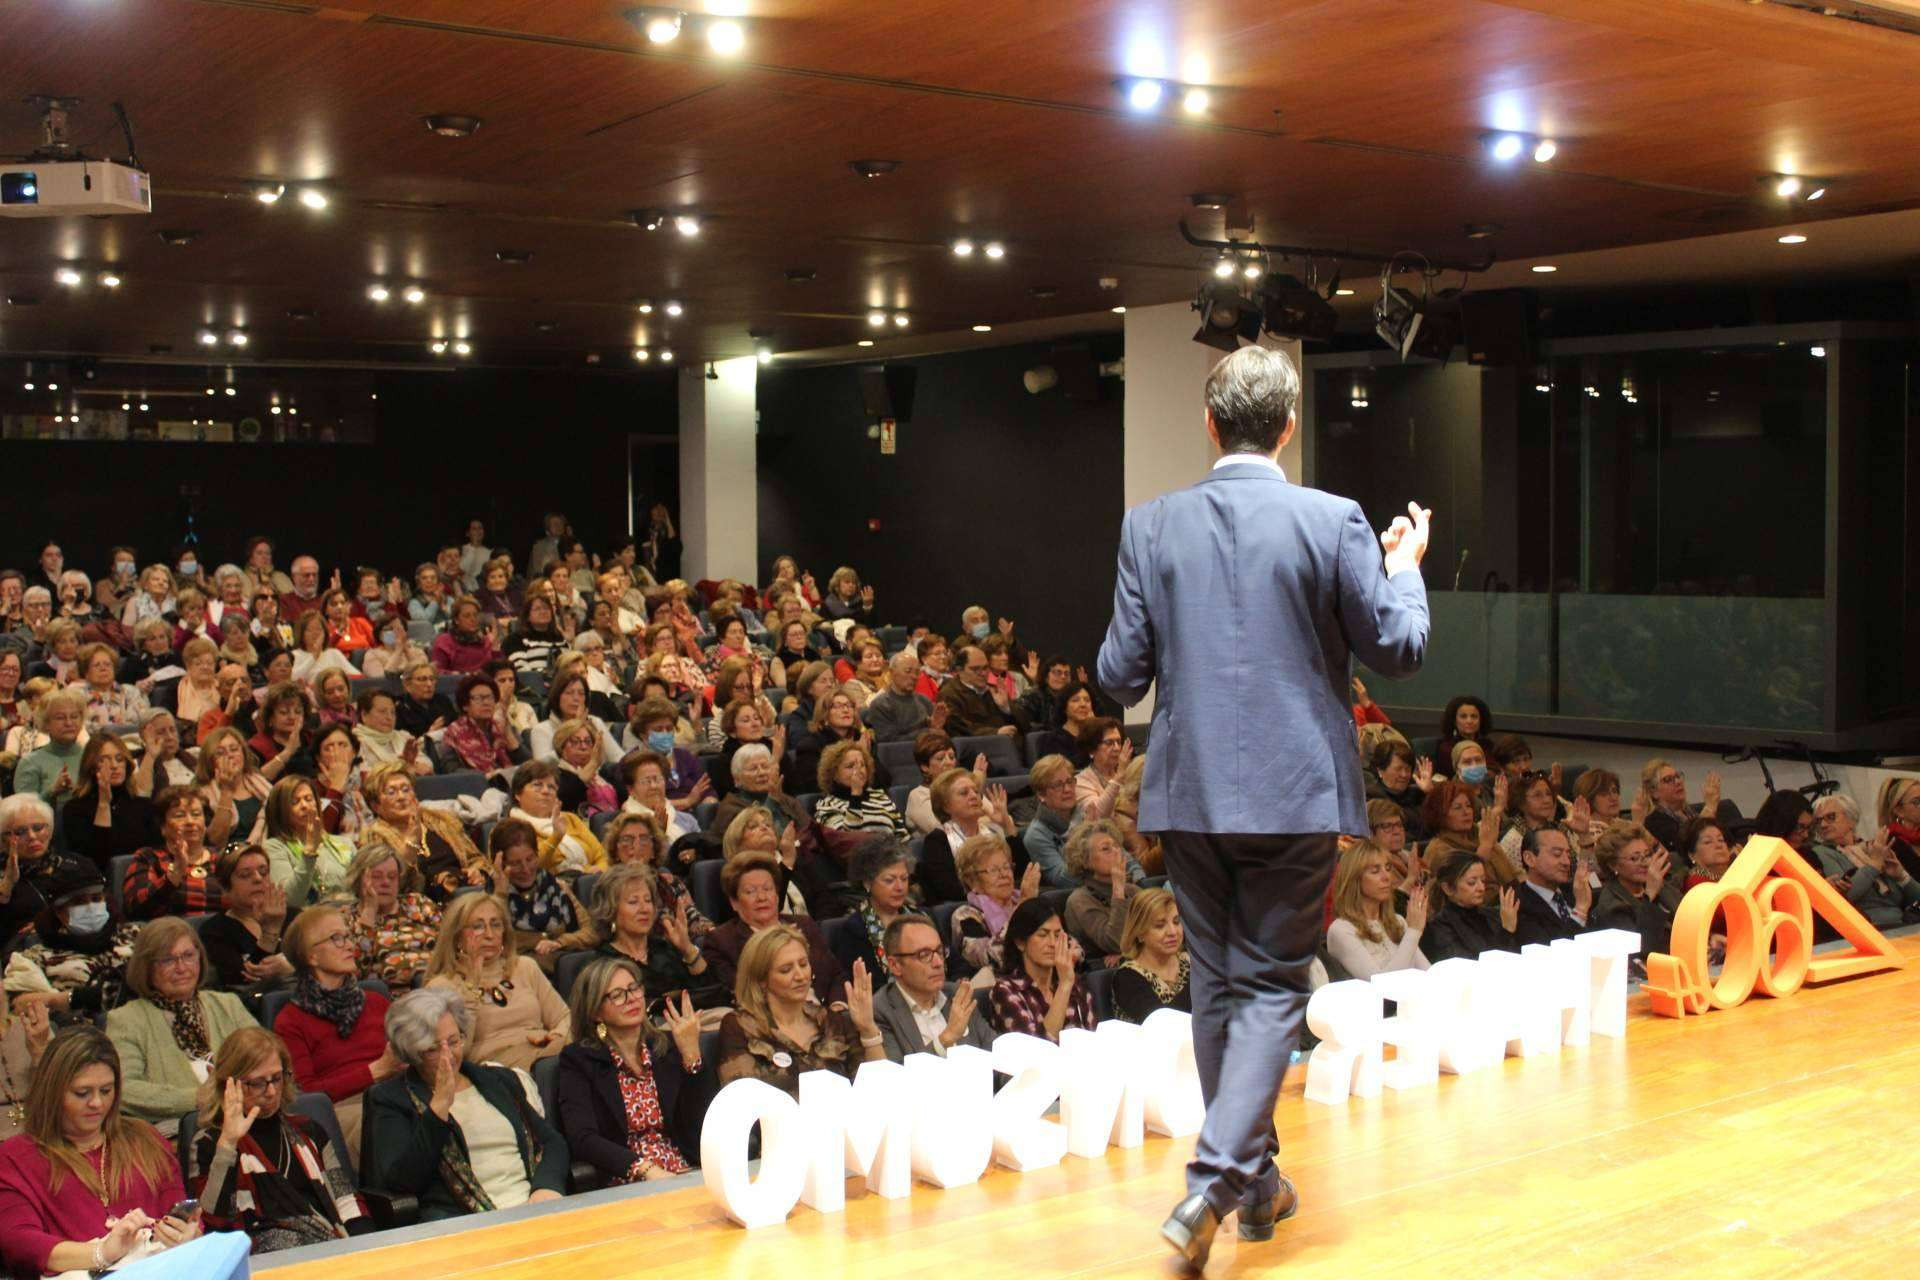 The presentation of the book “The Ten Keys to Well-Being” receives more than 200 people